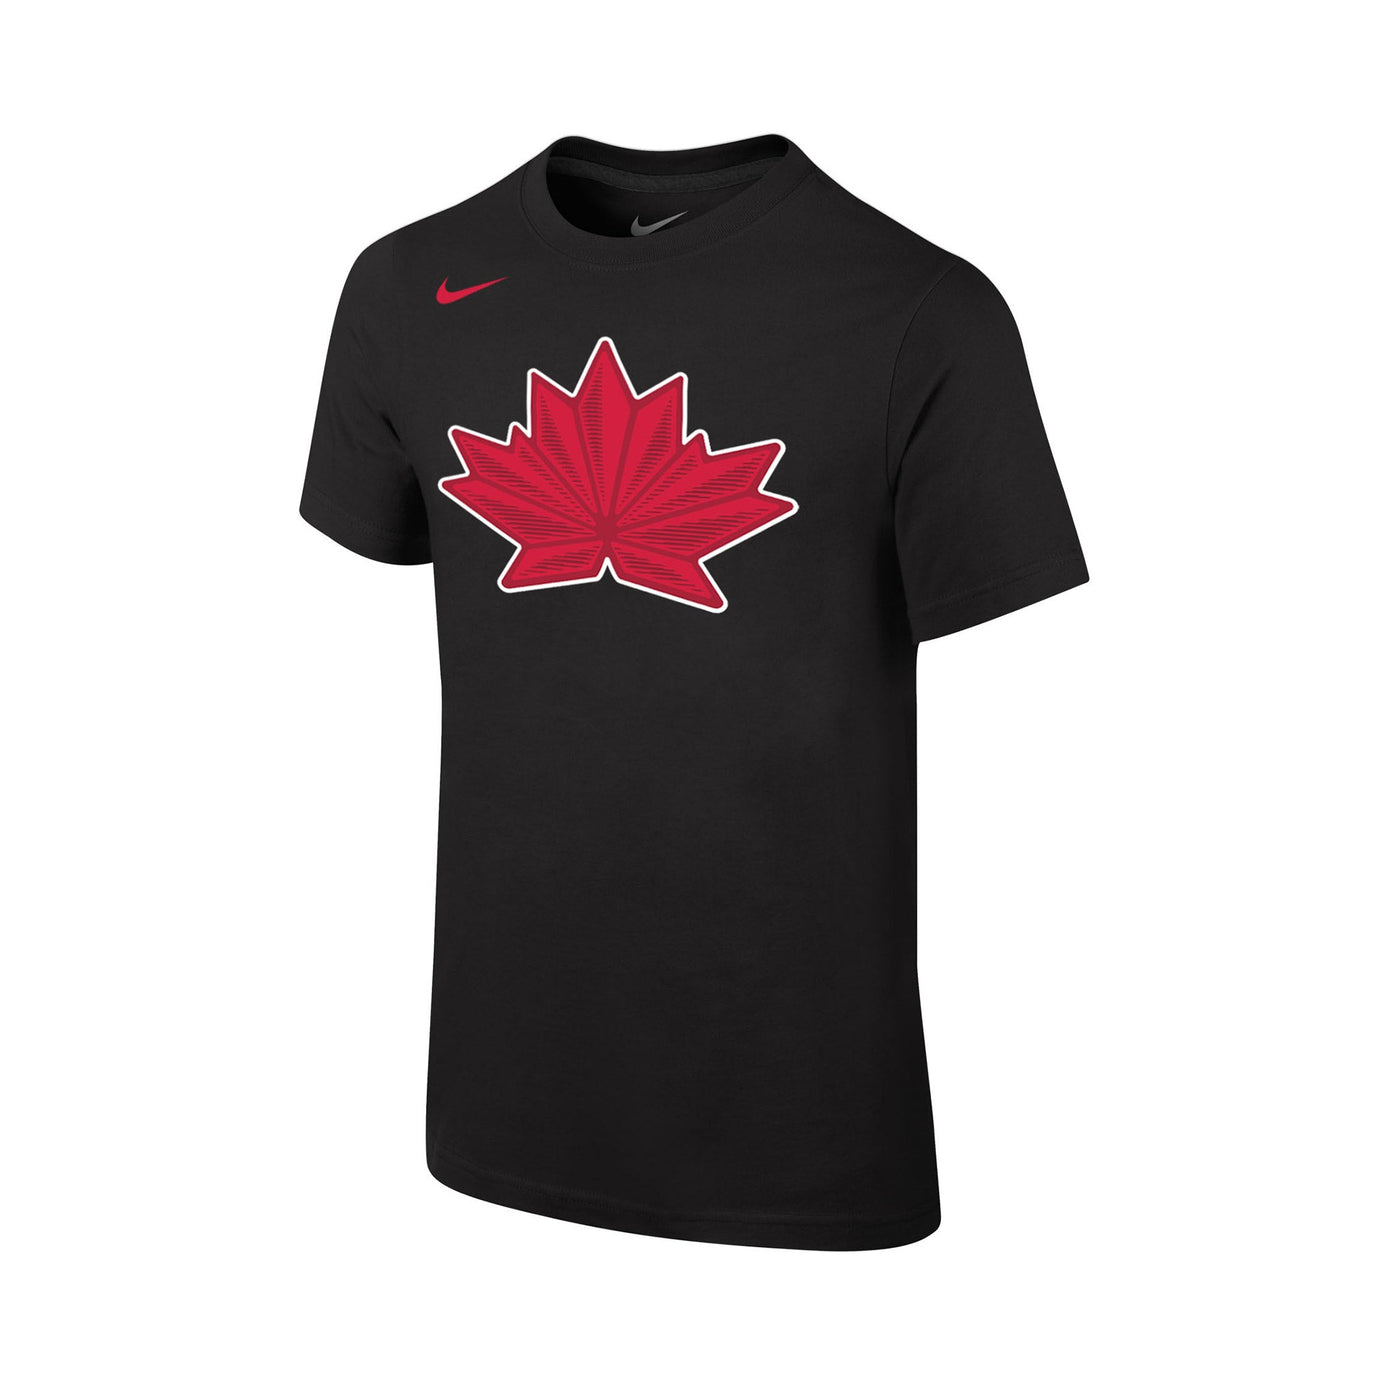 Team Canada Olympic Nike Core Cotton Youth Shirt